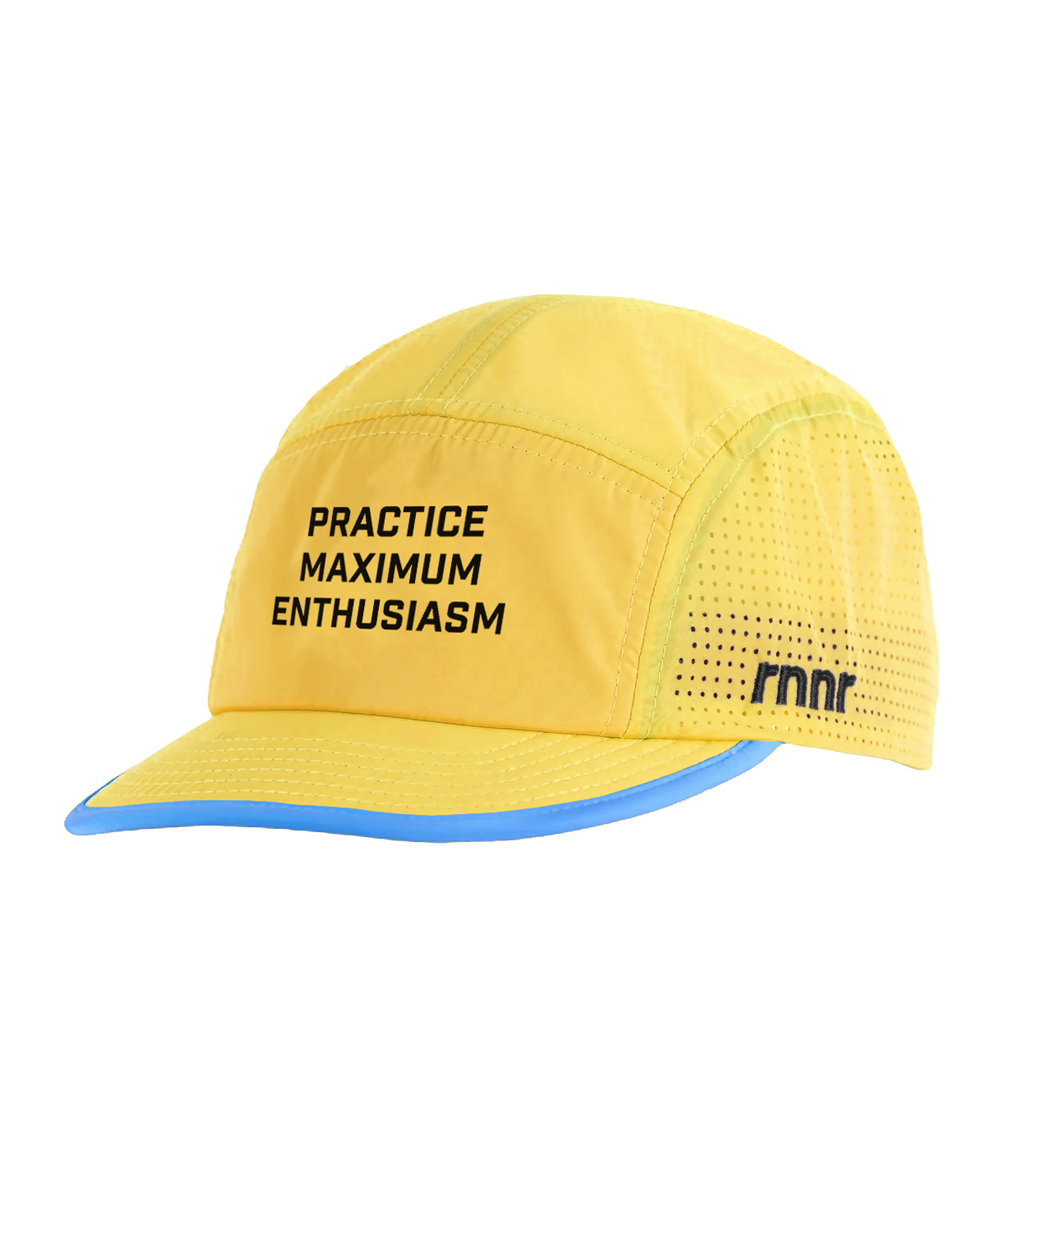 A yellow running hat with a blue line around the rim. There is black text on the front that says 